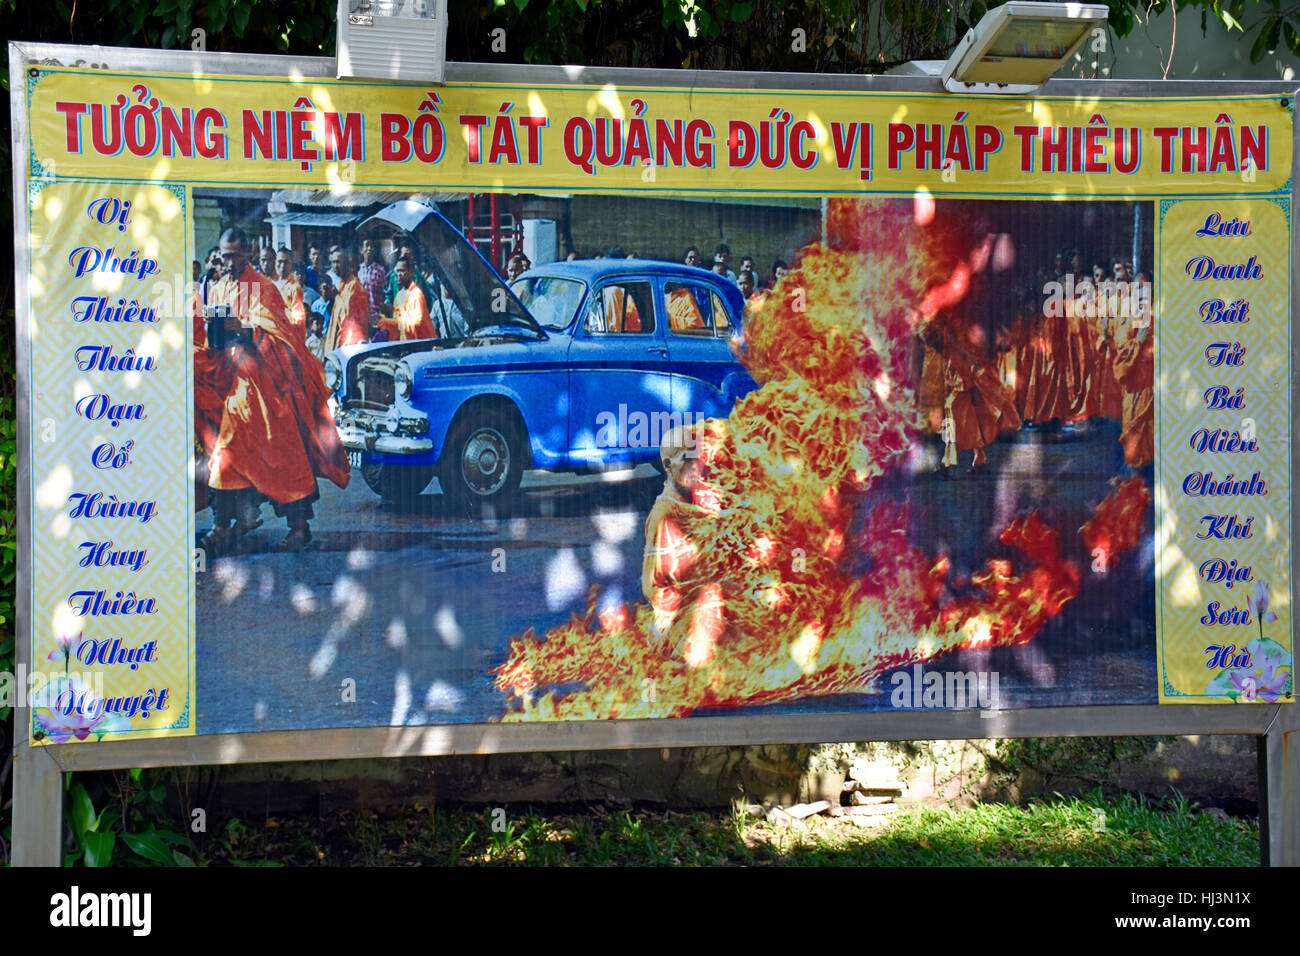 Billboard explaining Buddhist Monk Thich Quang Duc's protest in 1963, Ho Chi Minh City, Vietnam Stock Photo